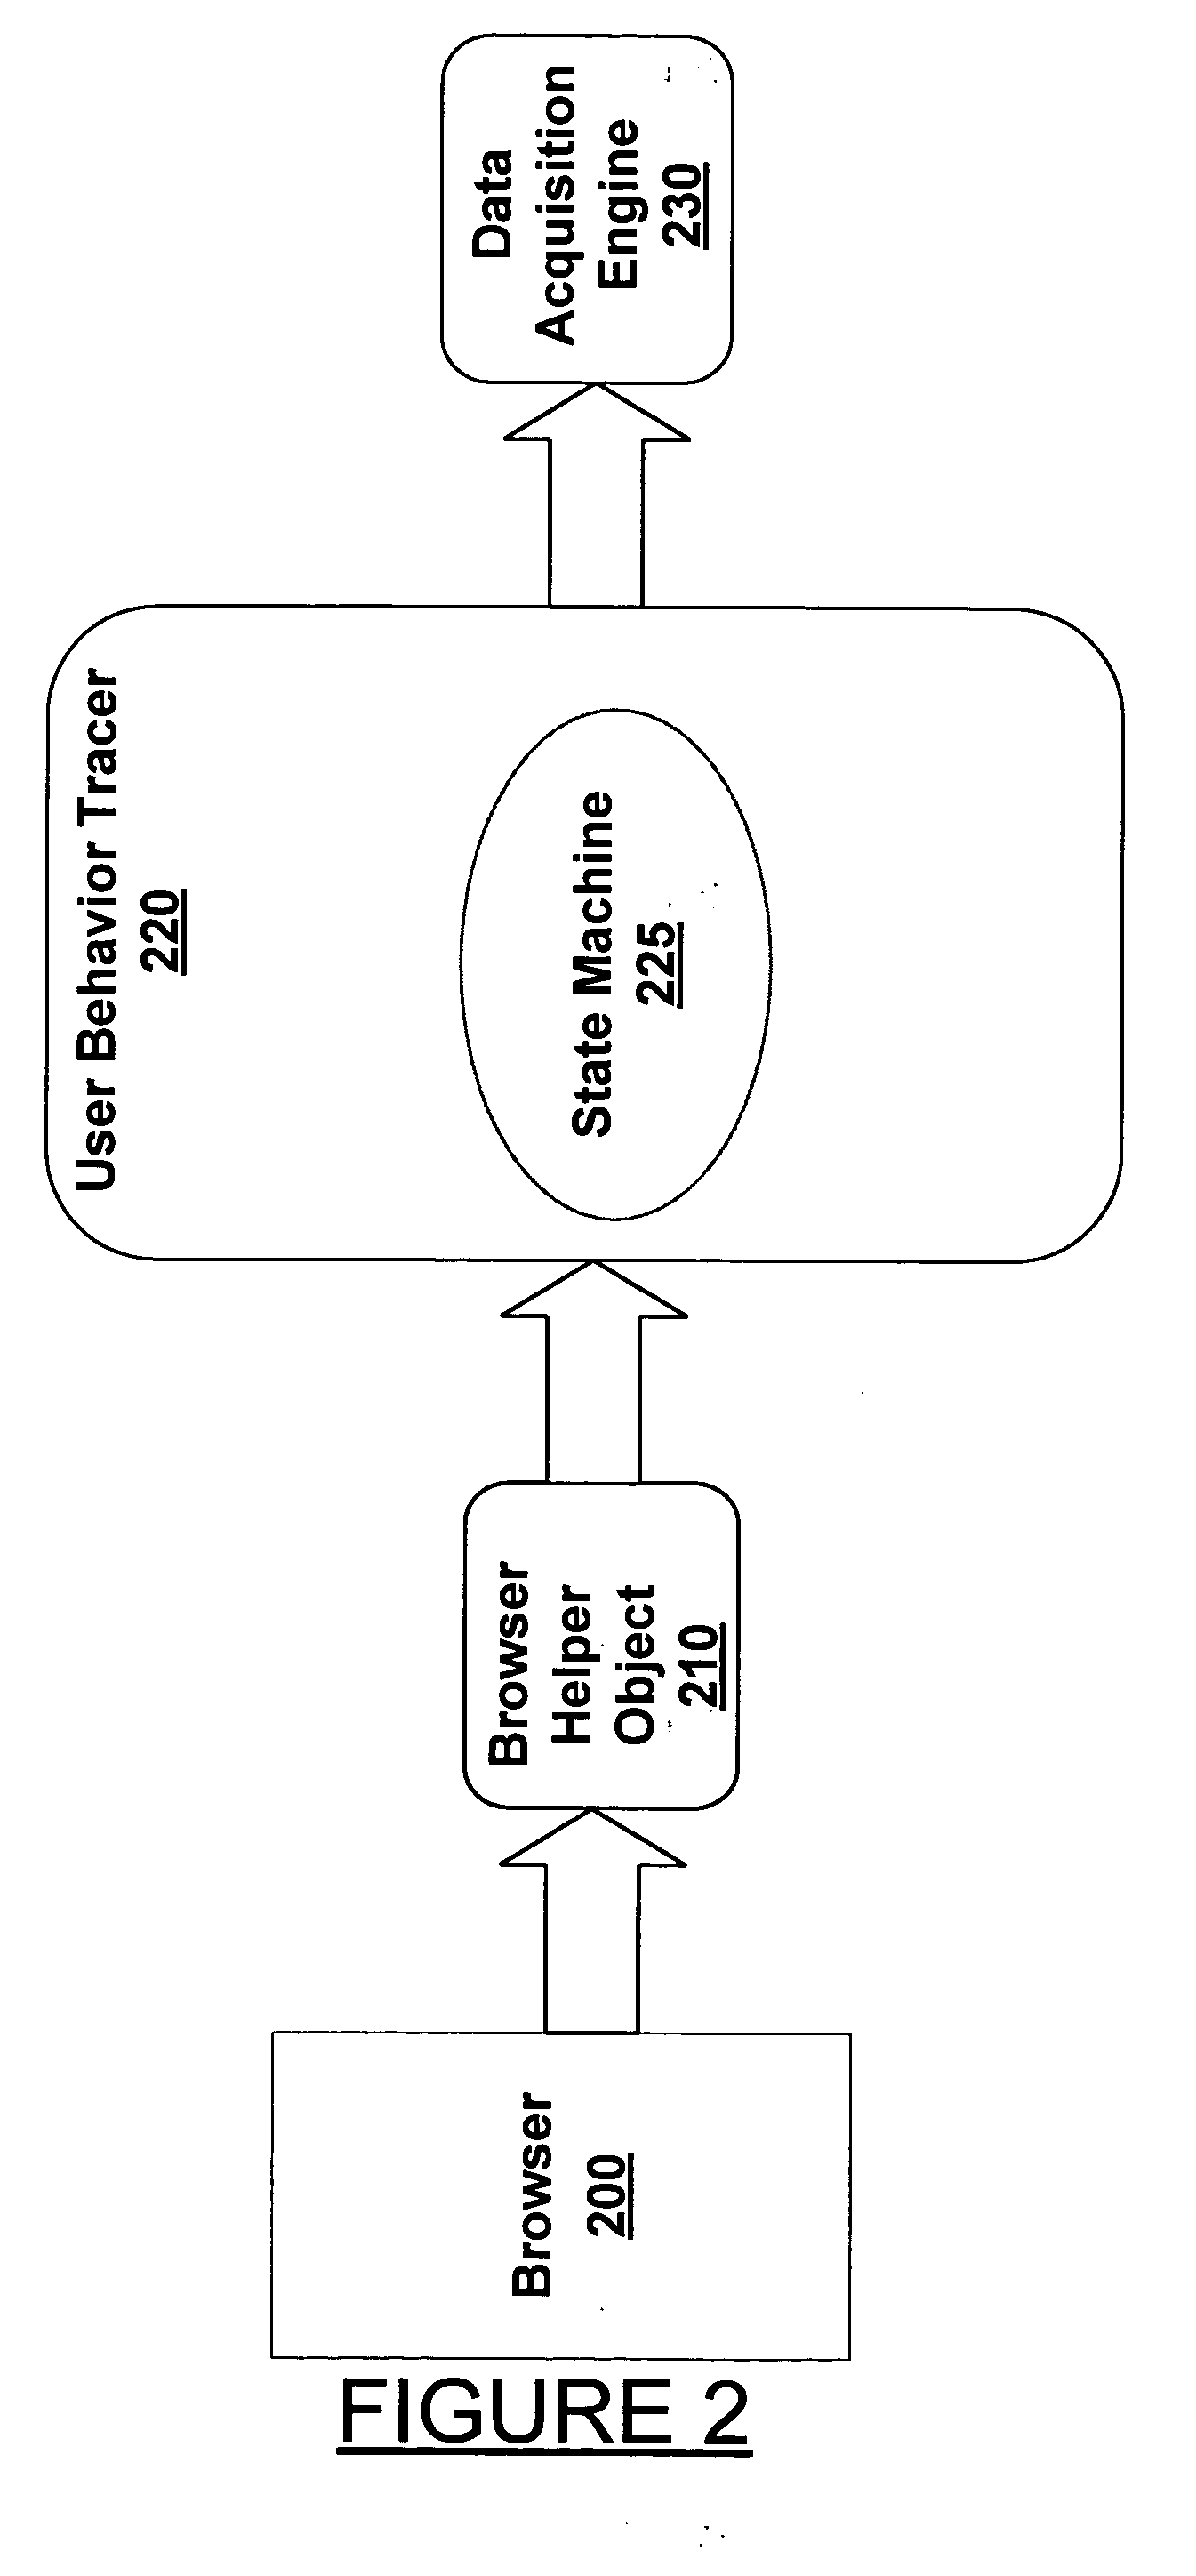 Systems and methods for discovery of data that needs improving or authored using user search results diagnostics